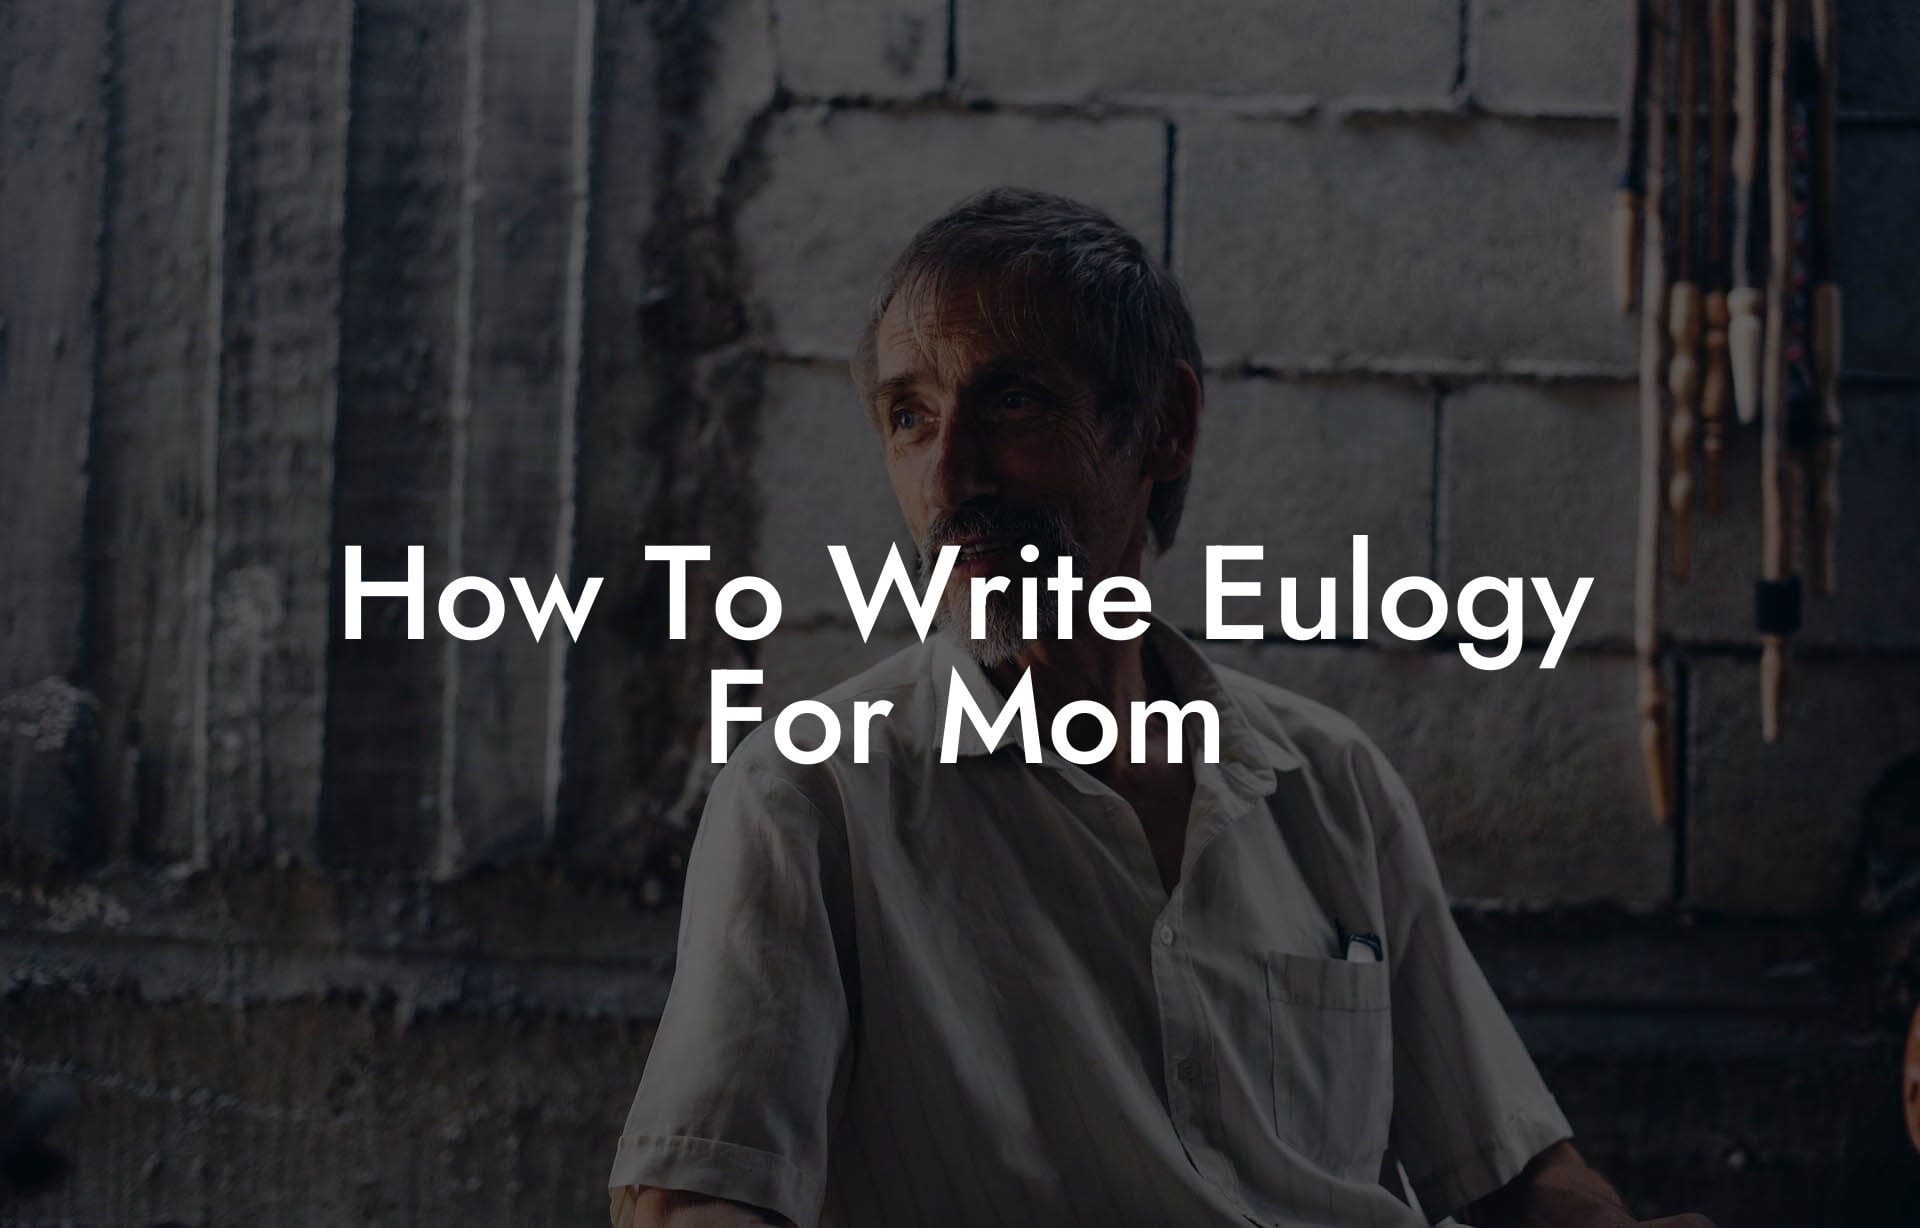 How To Write Eulogy For Mom